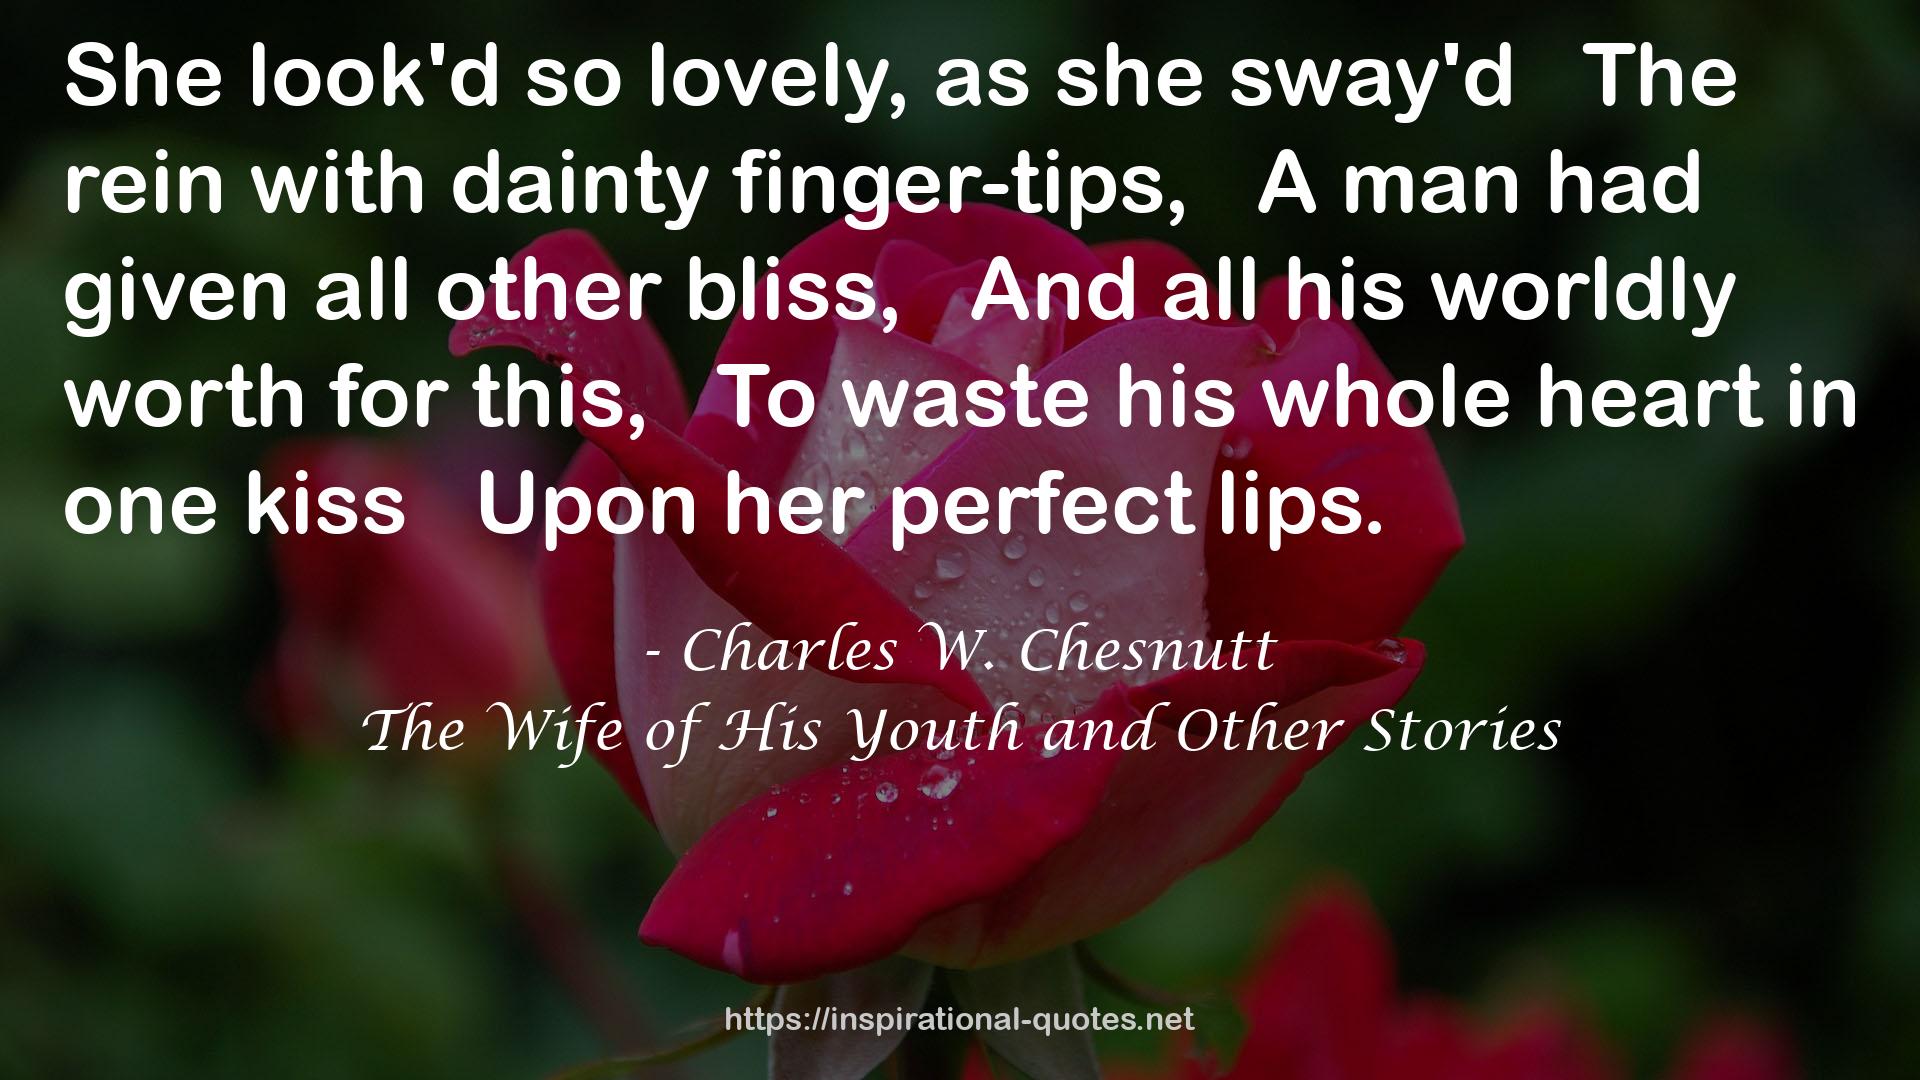 The Wife of His Youth and Other Stories QUOTES